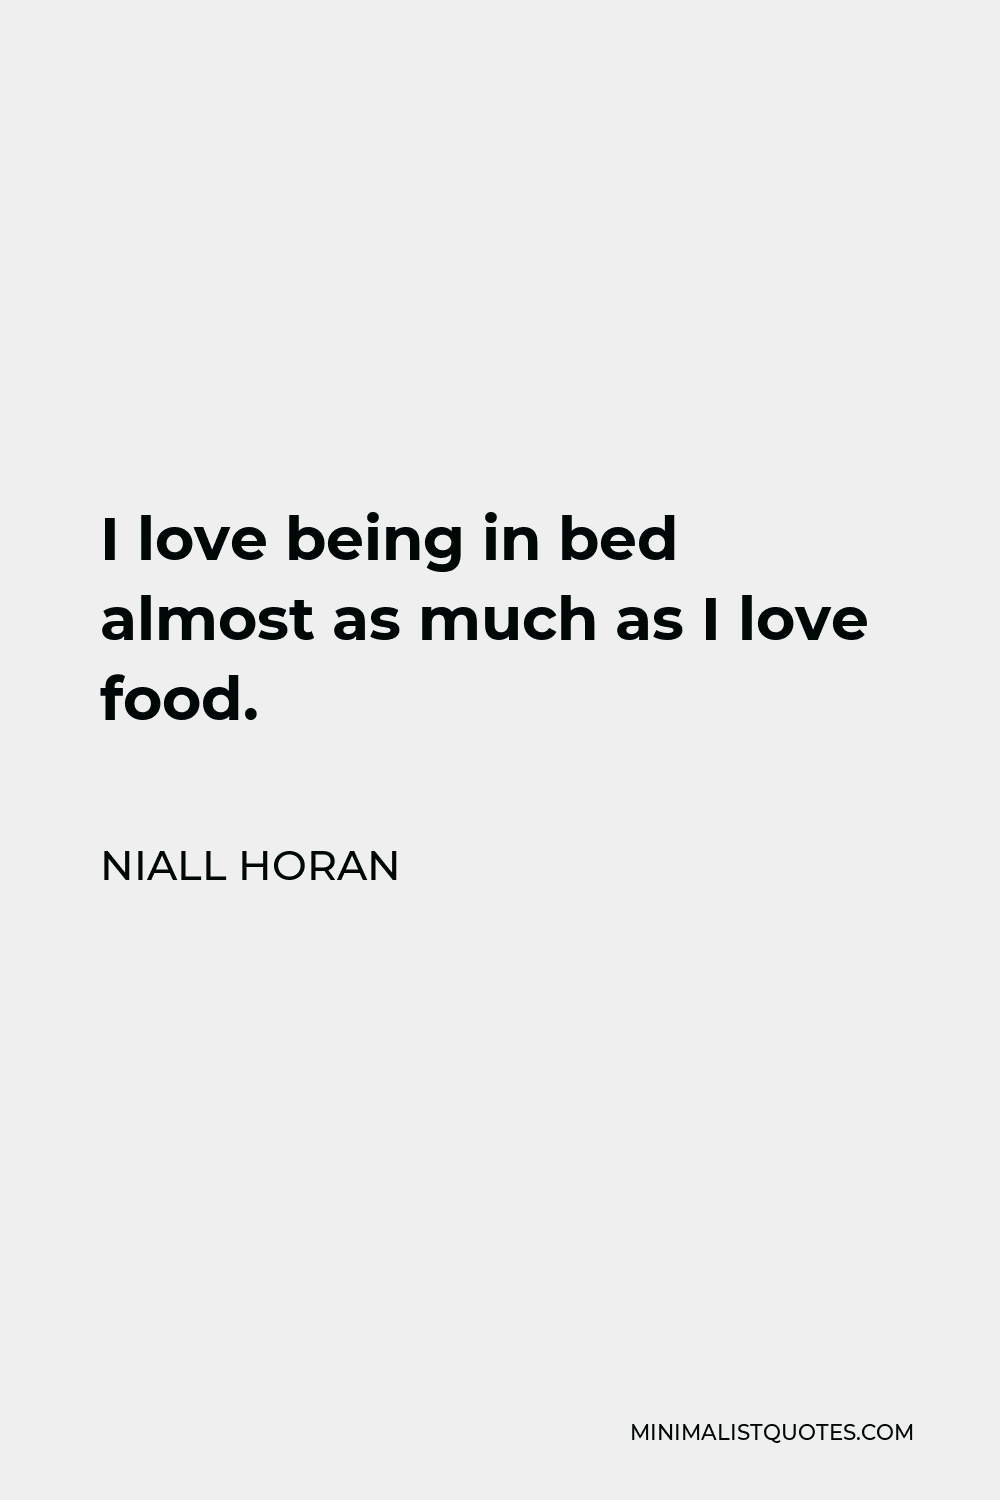 Niall Horan Quote - I love being in bed almost as much as I love food.